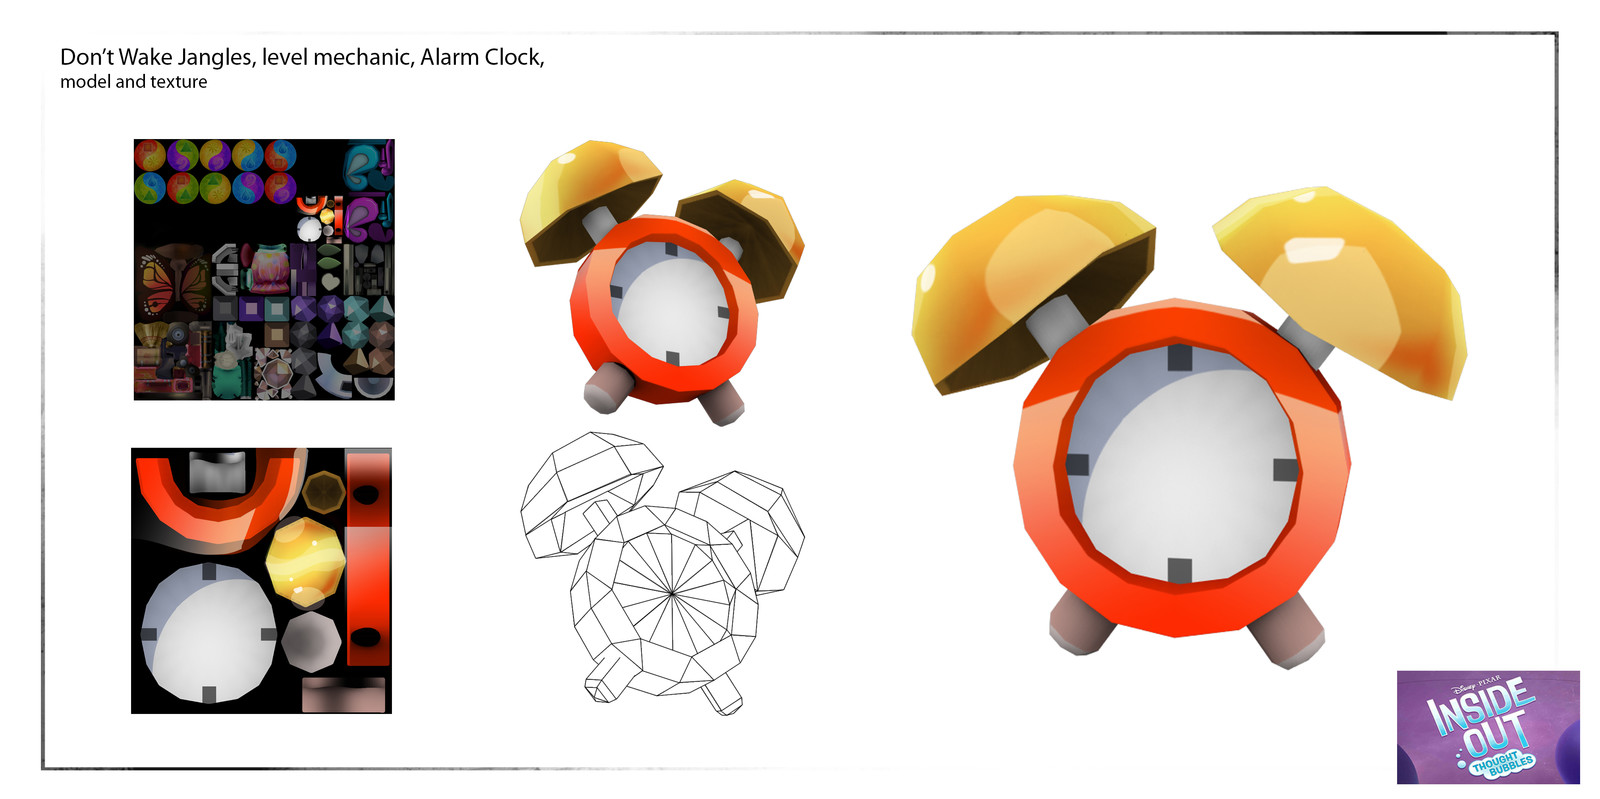 Modeled, painted textured and animated alarm clock for in game mechanic